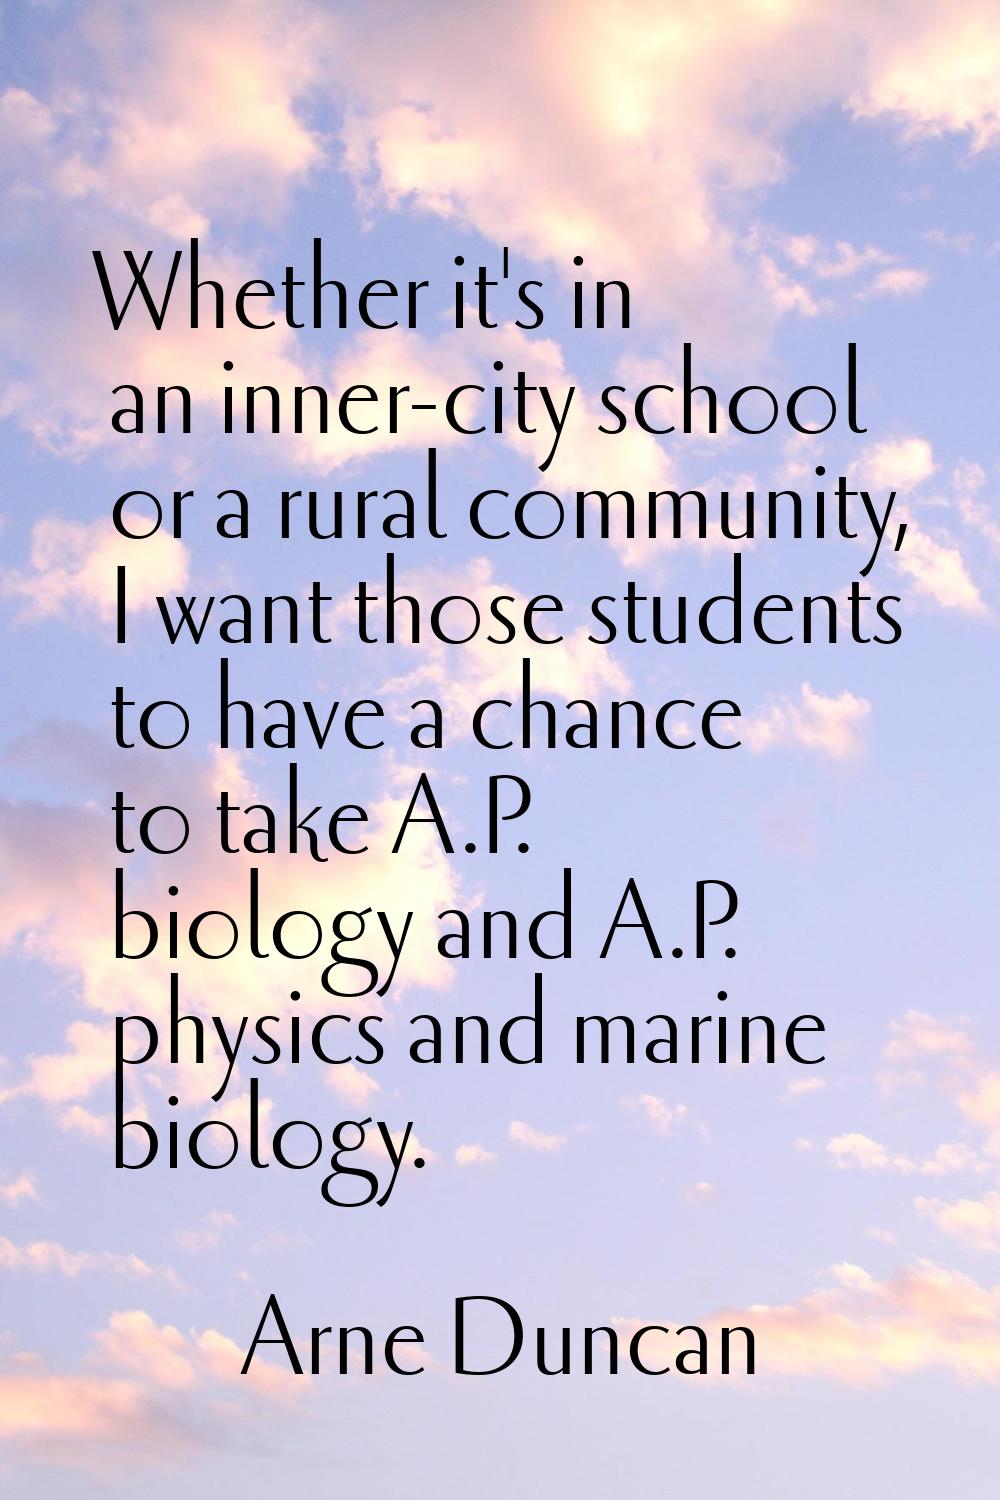 Whether it's in an inner-city school or a rural community, I want those students to have a chance t